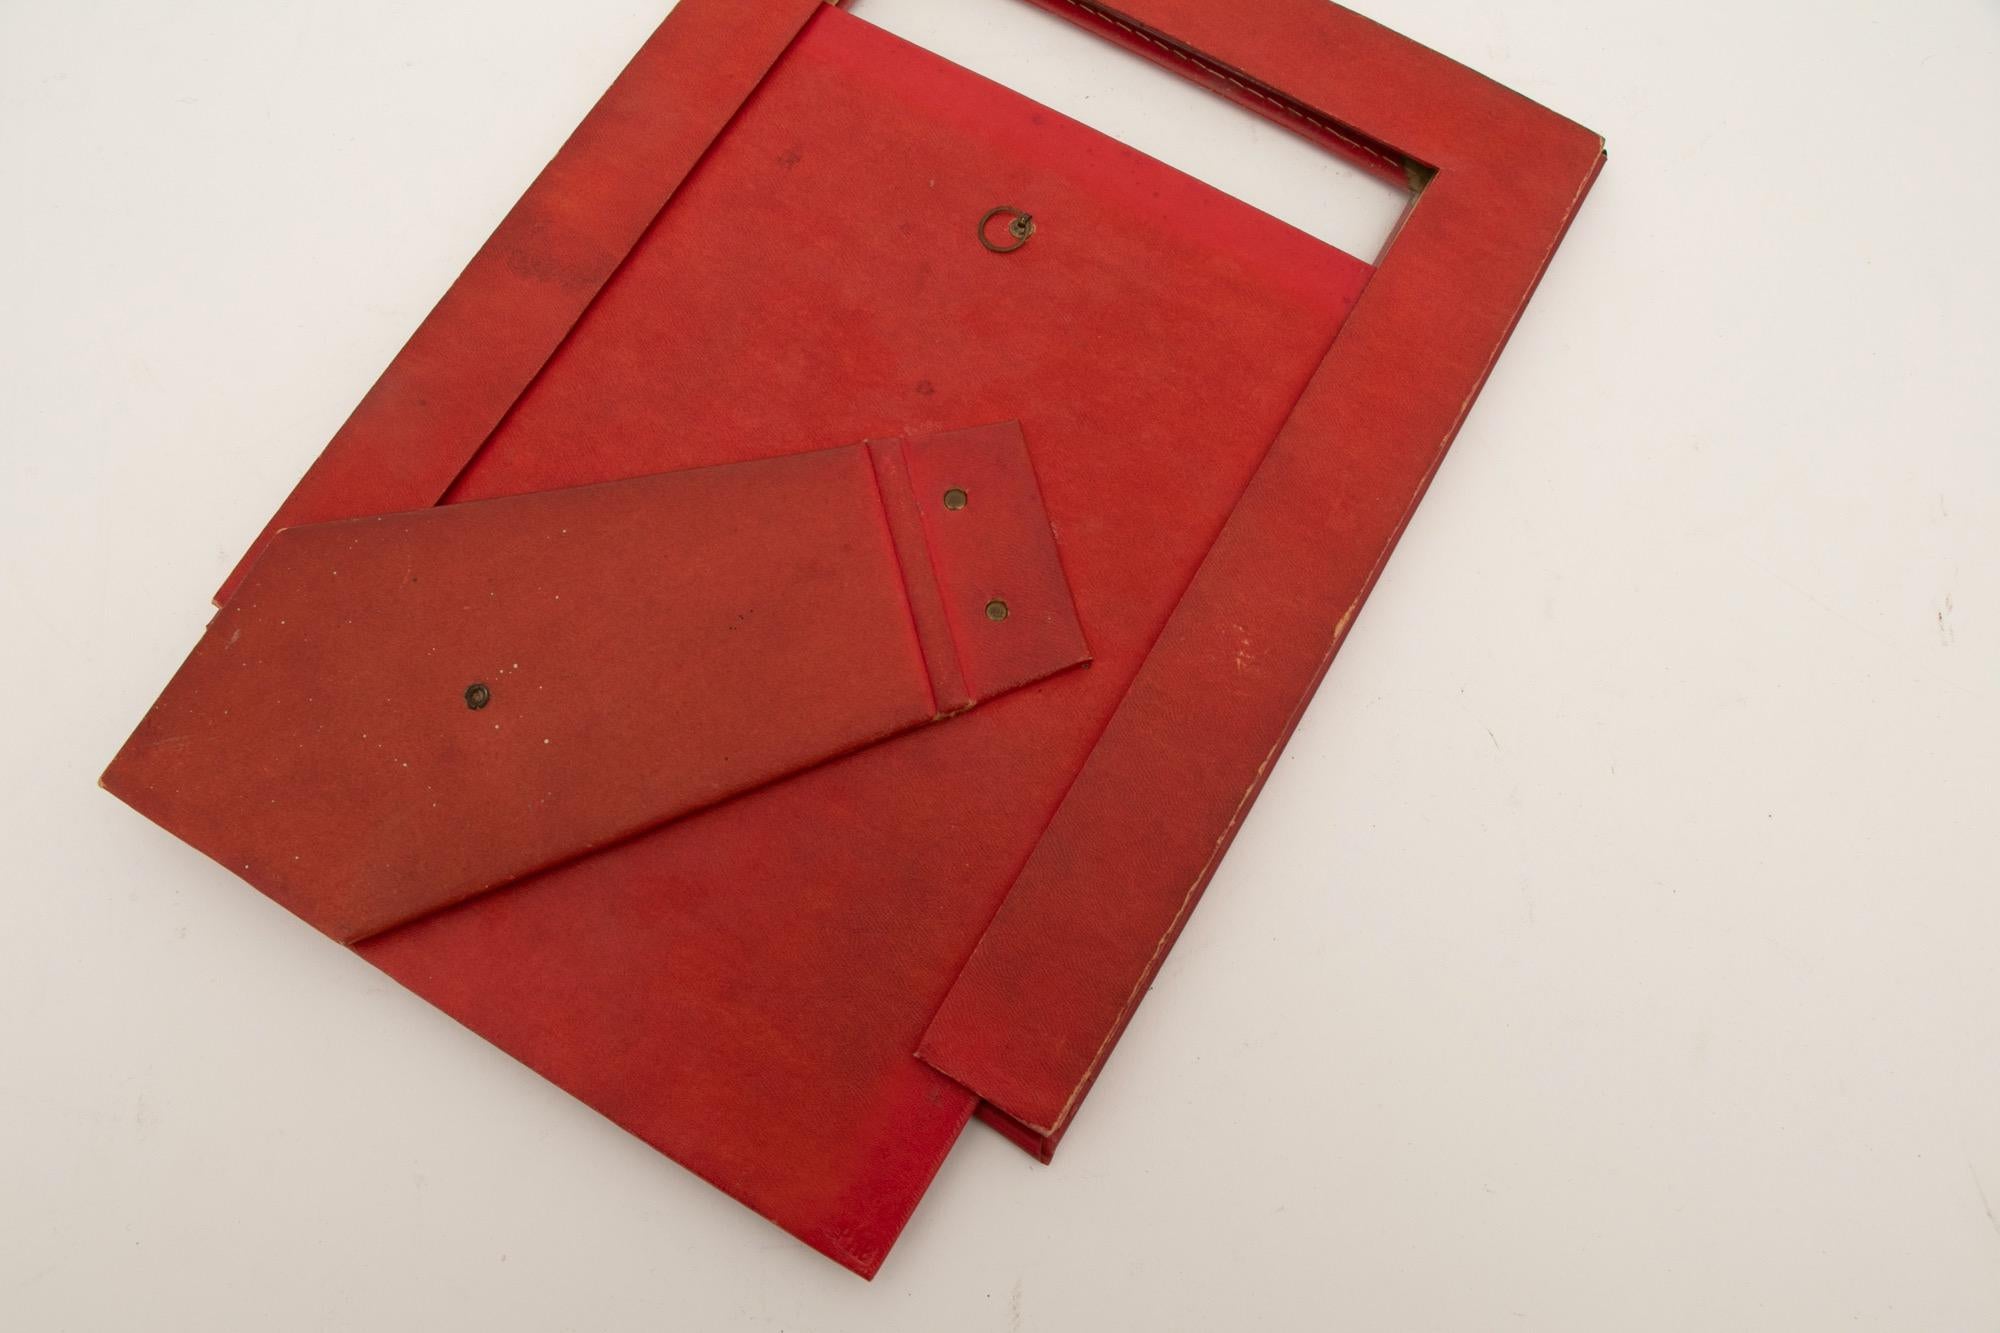 French Art Deco Photo Frame in an Italian Red Leather In Good Condition For Sale In London, GB